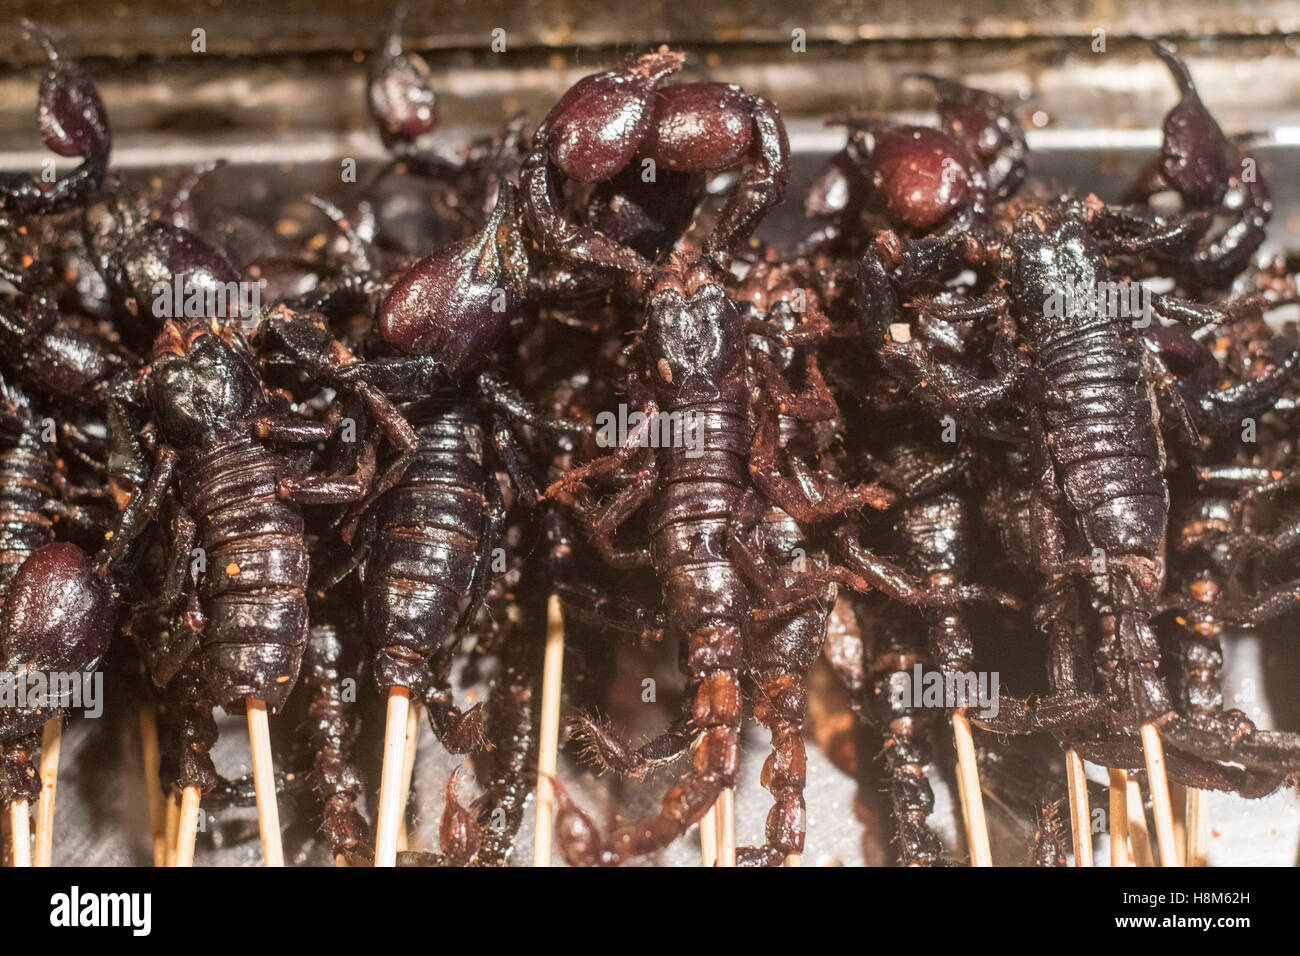 Beijing, China - Cooked scorpions on a stick for sale at the Donghuamen Snack Night Market, a large outdoor market that is an at Stock Photo